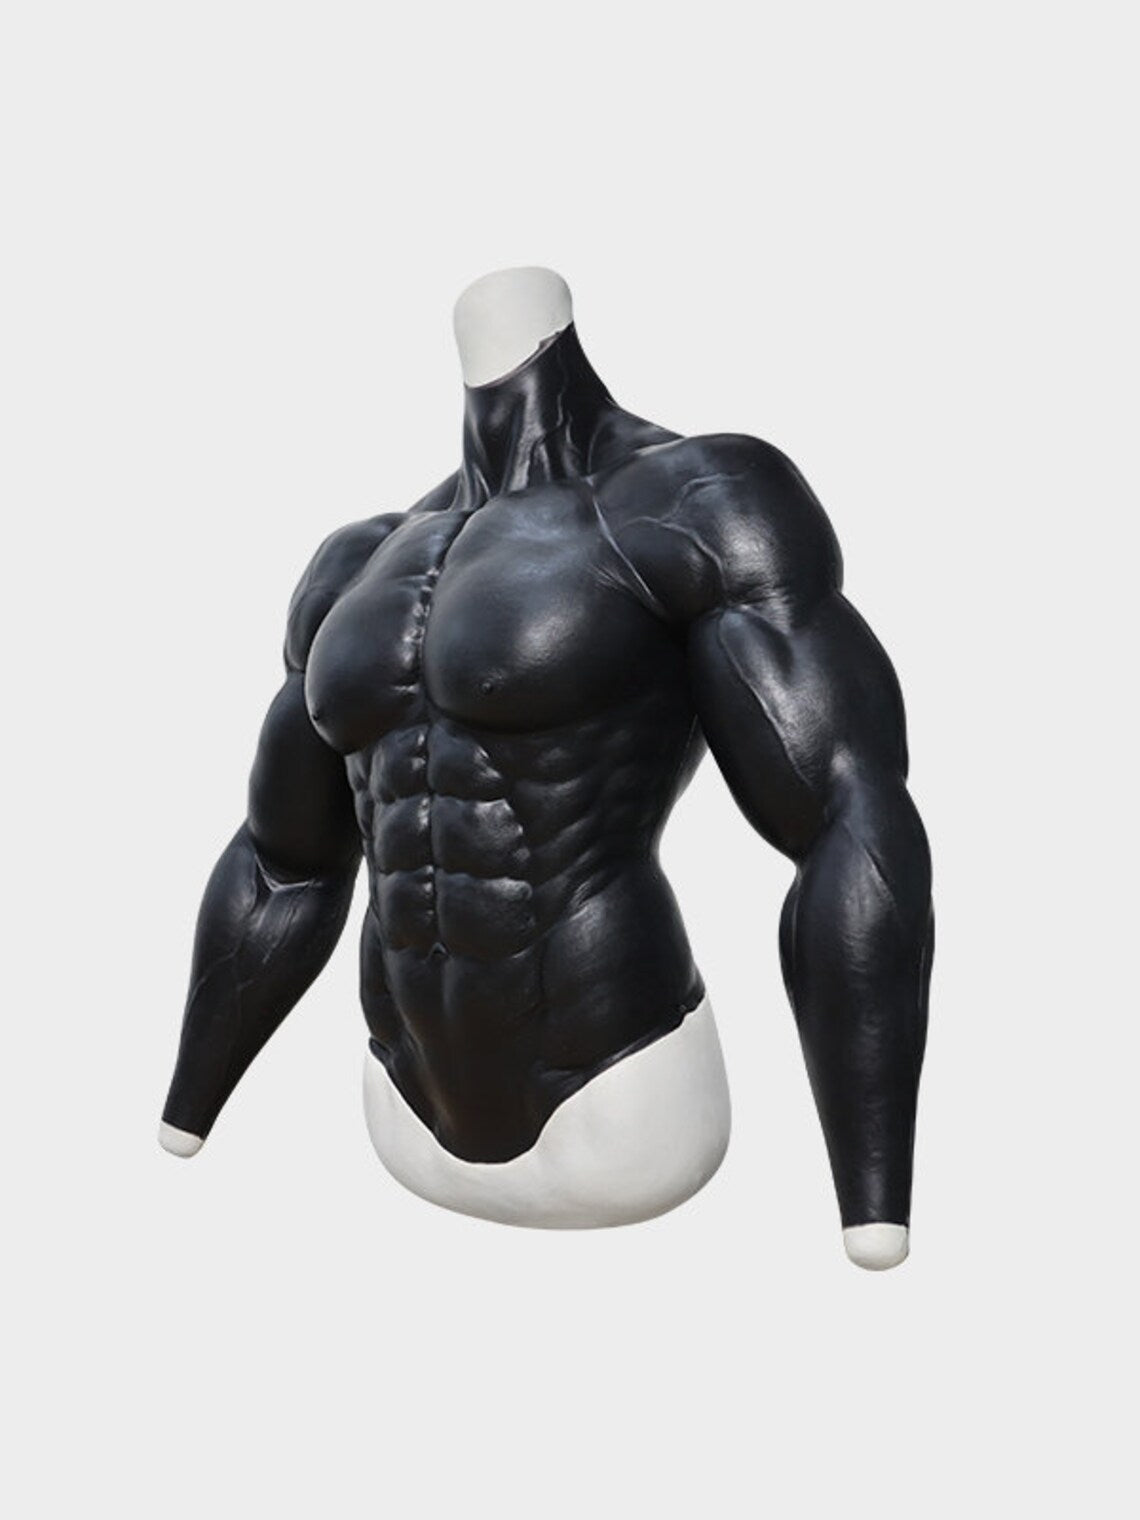 Premium High Quality Silicone Realistic Male Muscle Suit for